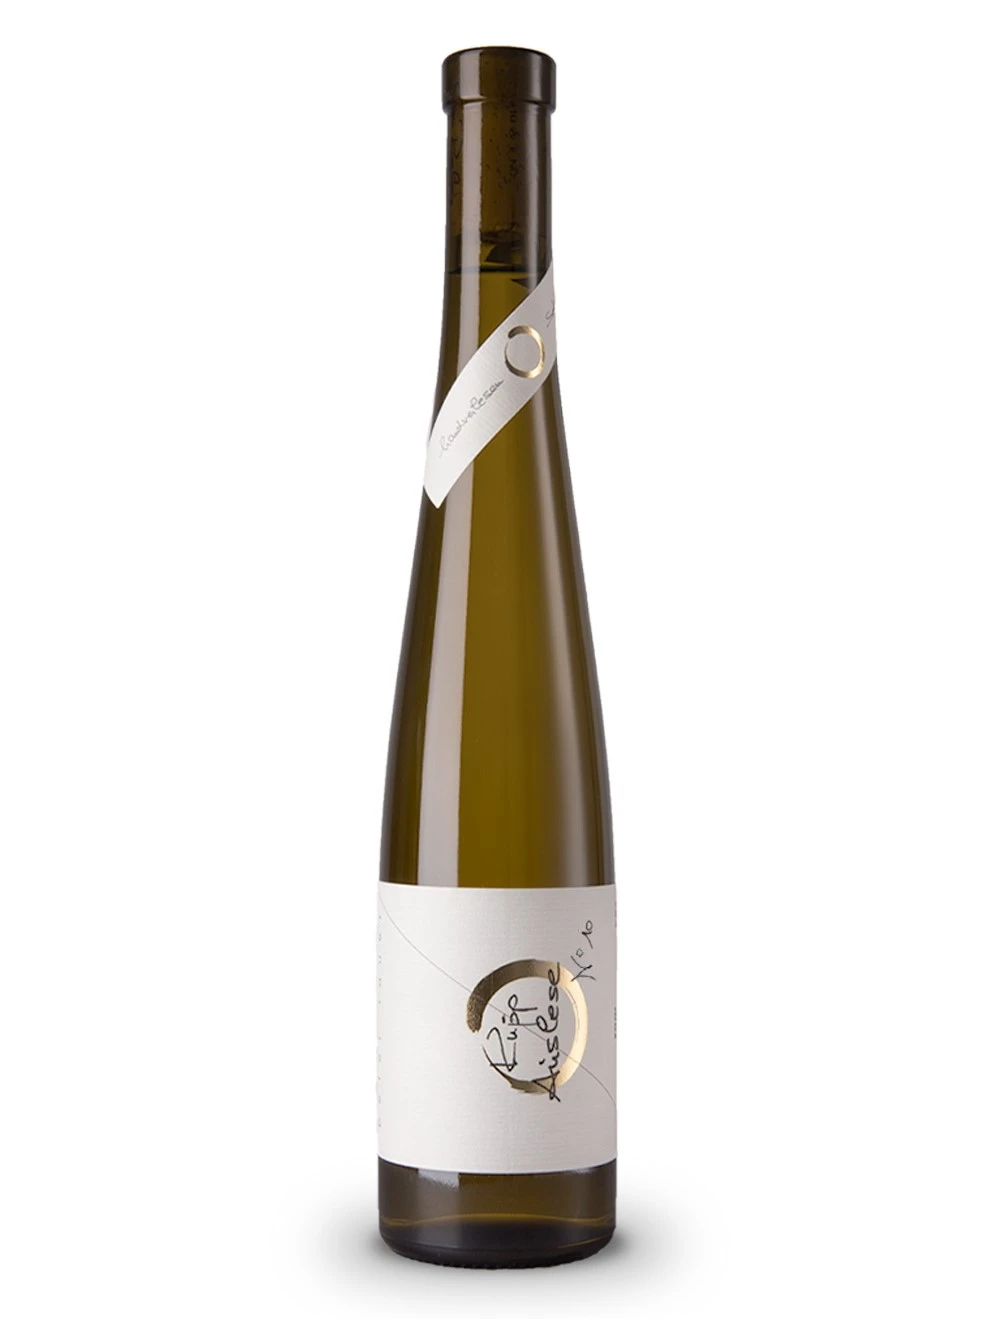 Peter Lauer Fass 10 Riesling Auslese Kupp 2017 halbe